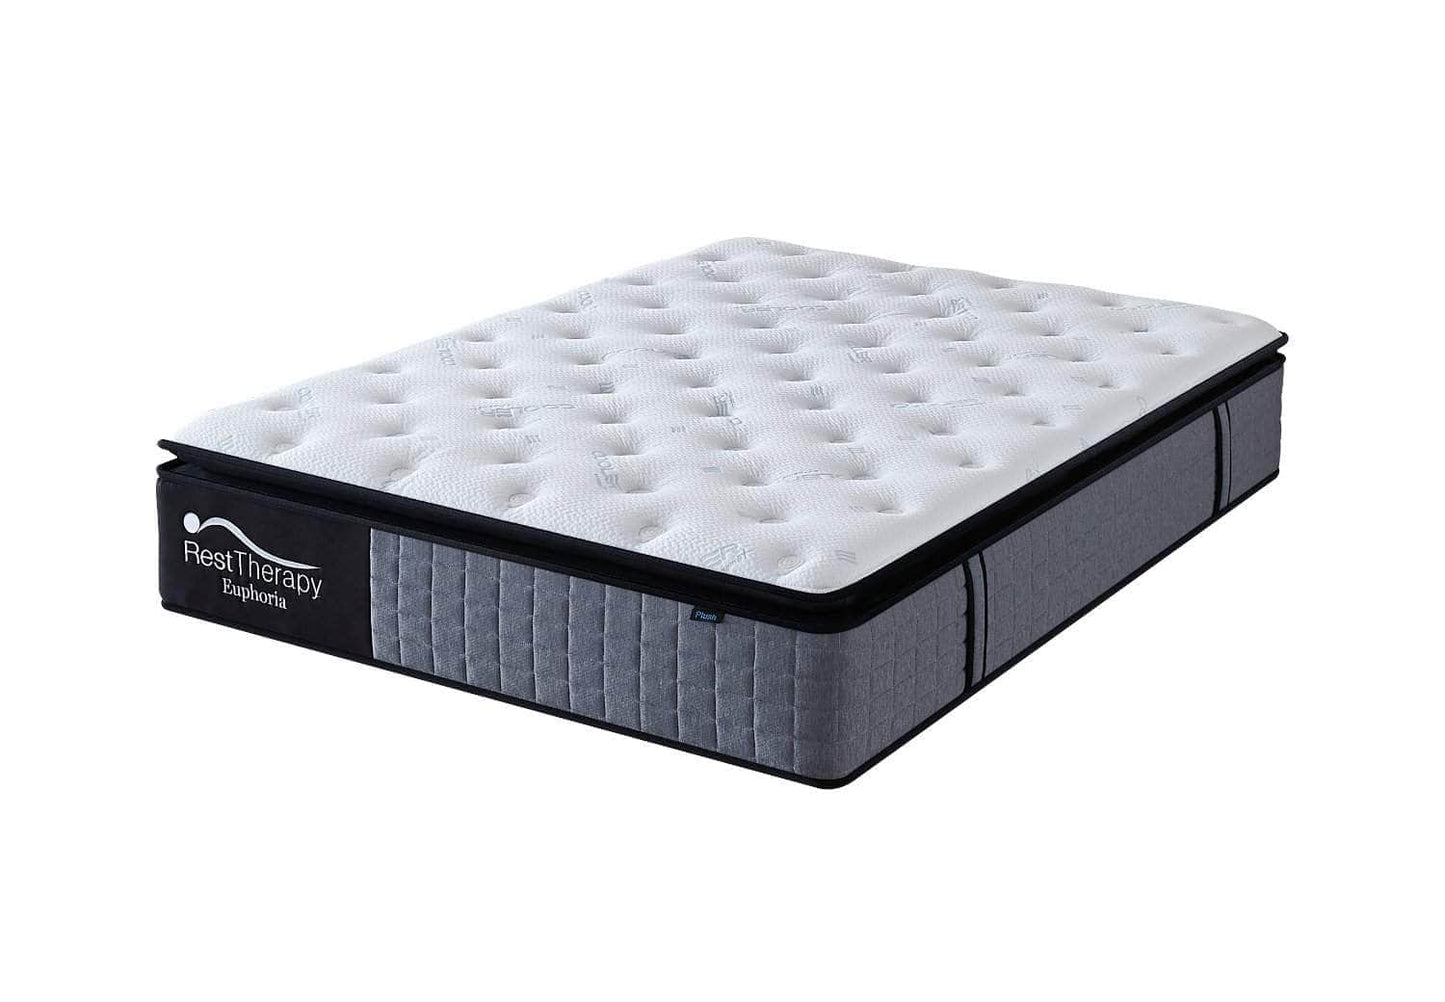 Rest Therapy Mattress Queen 14" Euphoria Hybrid Pocket Coil Twin, Full, Queen, or King Size Bed Mattresses